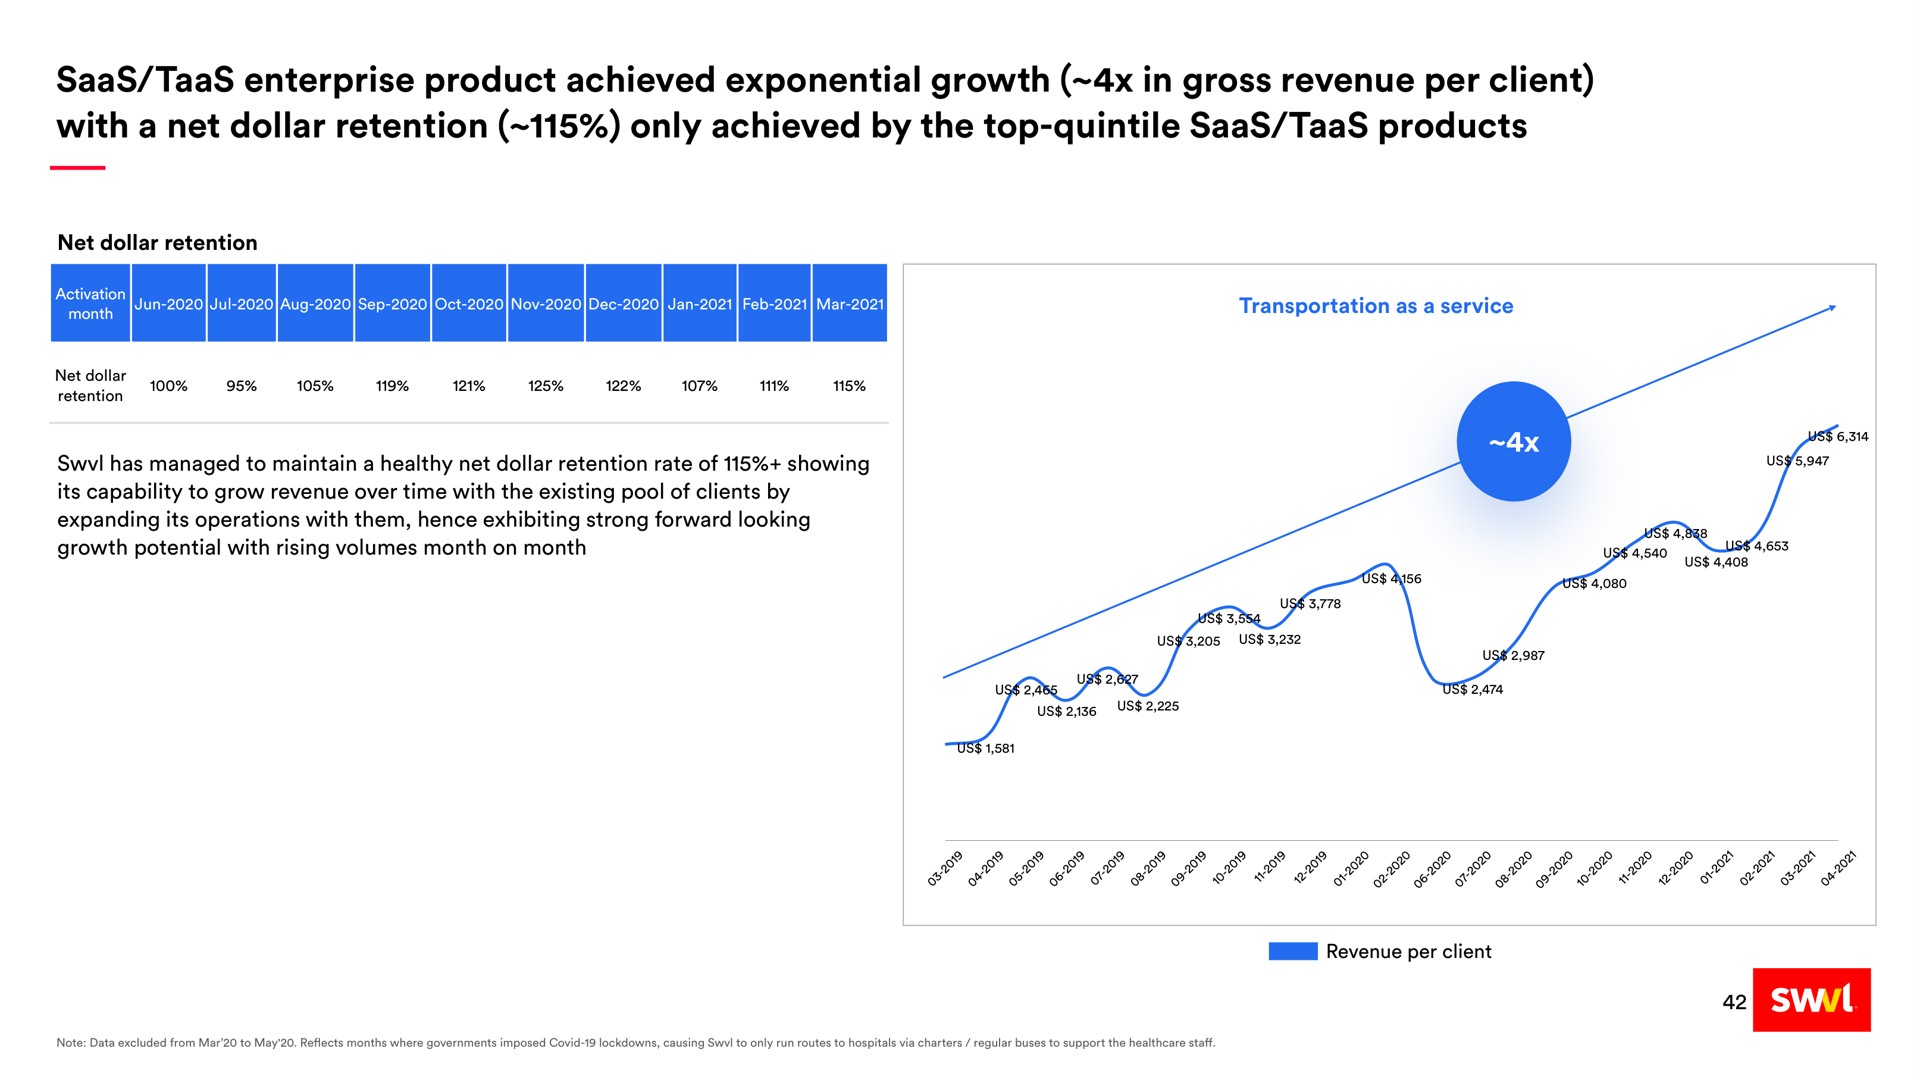 enterprise product achieved exponential growth in gross revenue per client with a net dollar retention only achieved by the top quintile products | Swvl